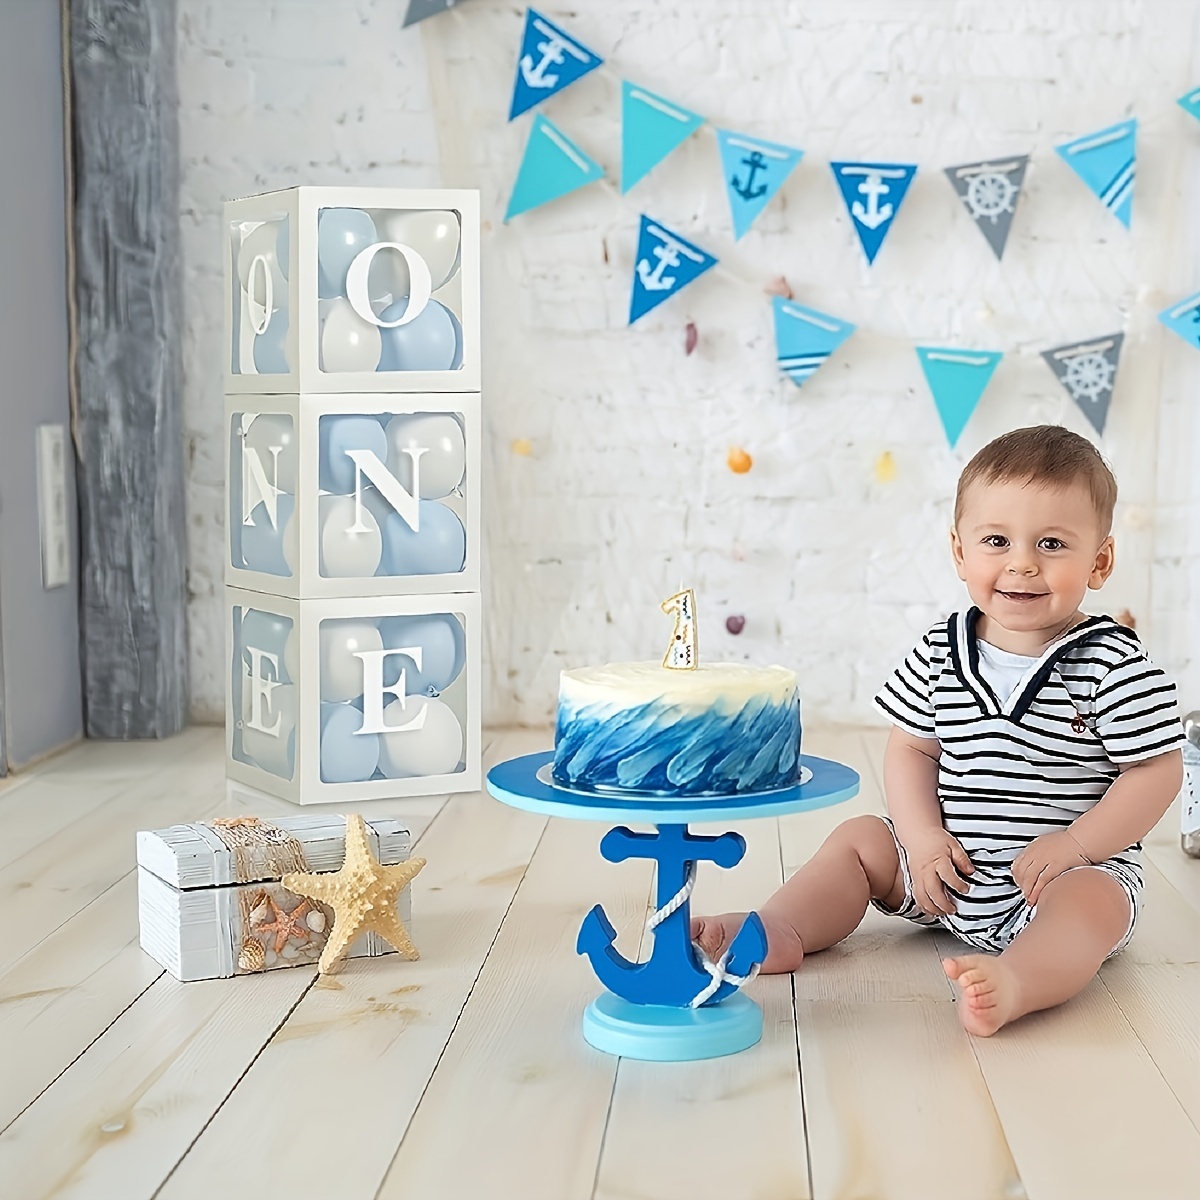 One Boxes for 1st Birthday WITH 24 Balloons for 1 Year Old Party - Baby  first Birthday Decorations Clear Cube Blocks 'ONE' Letters as Cake Smash